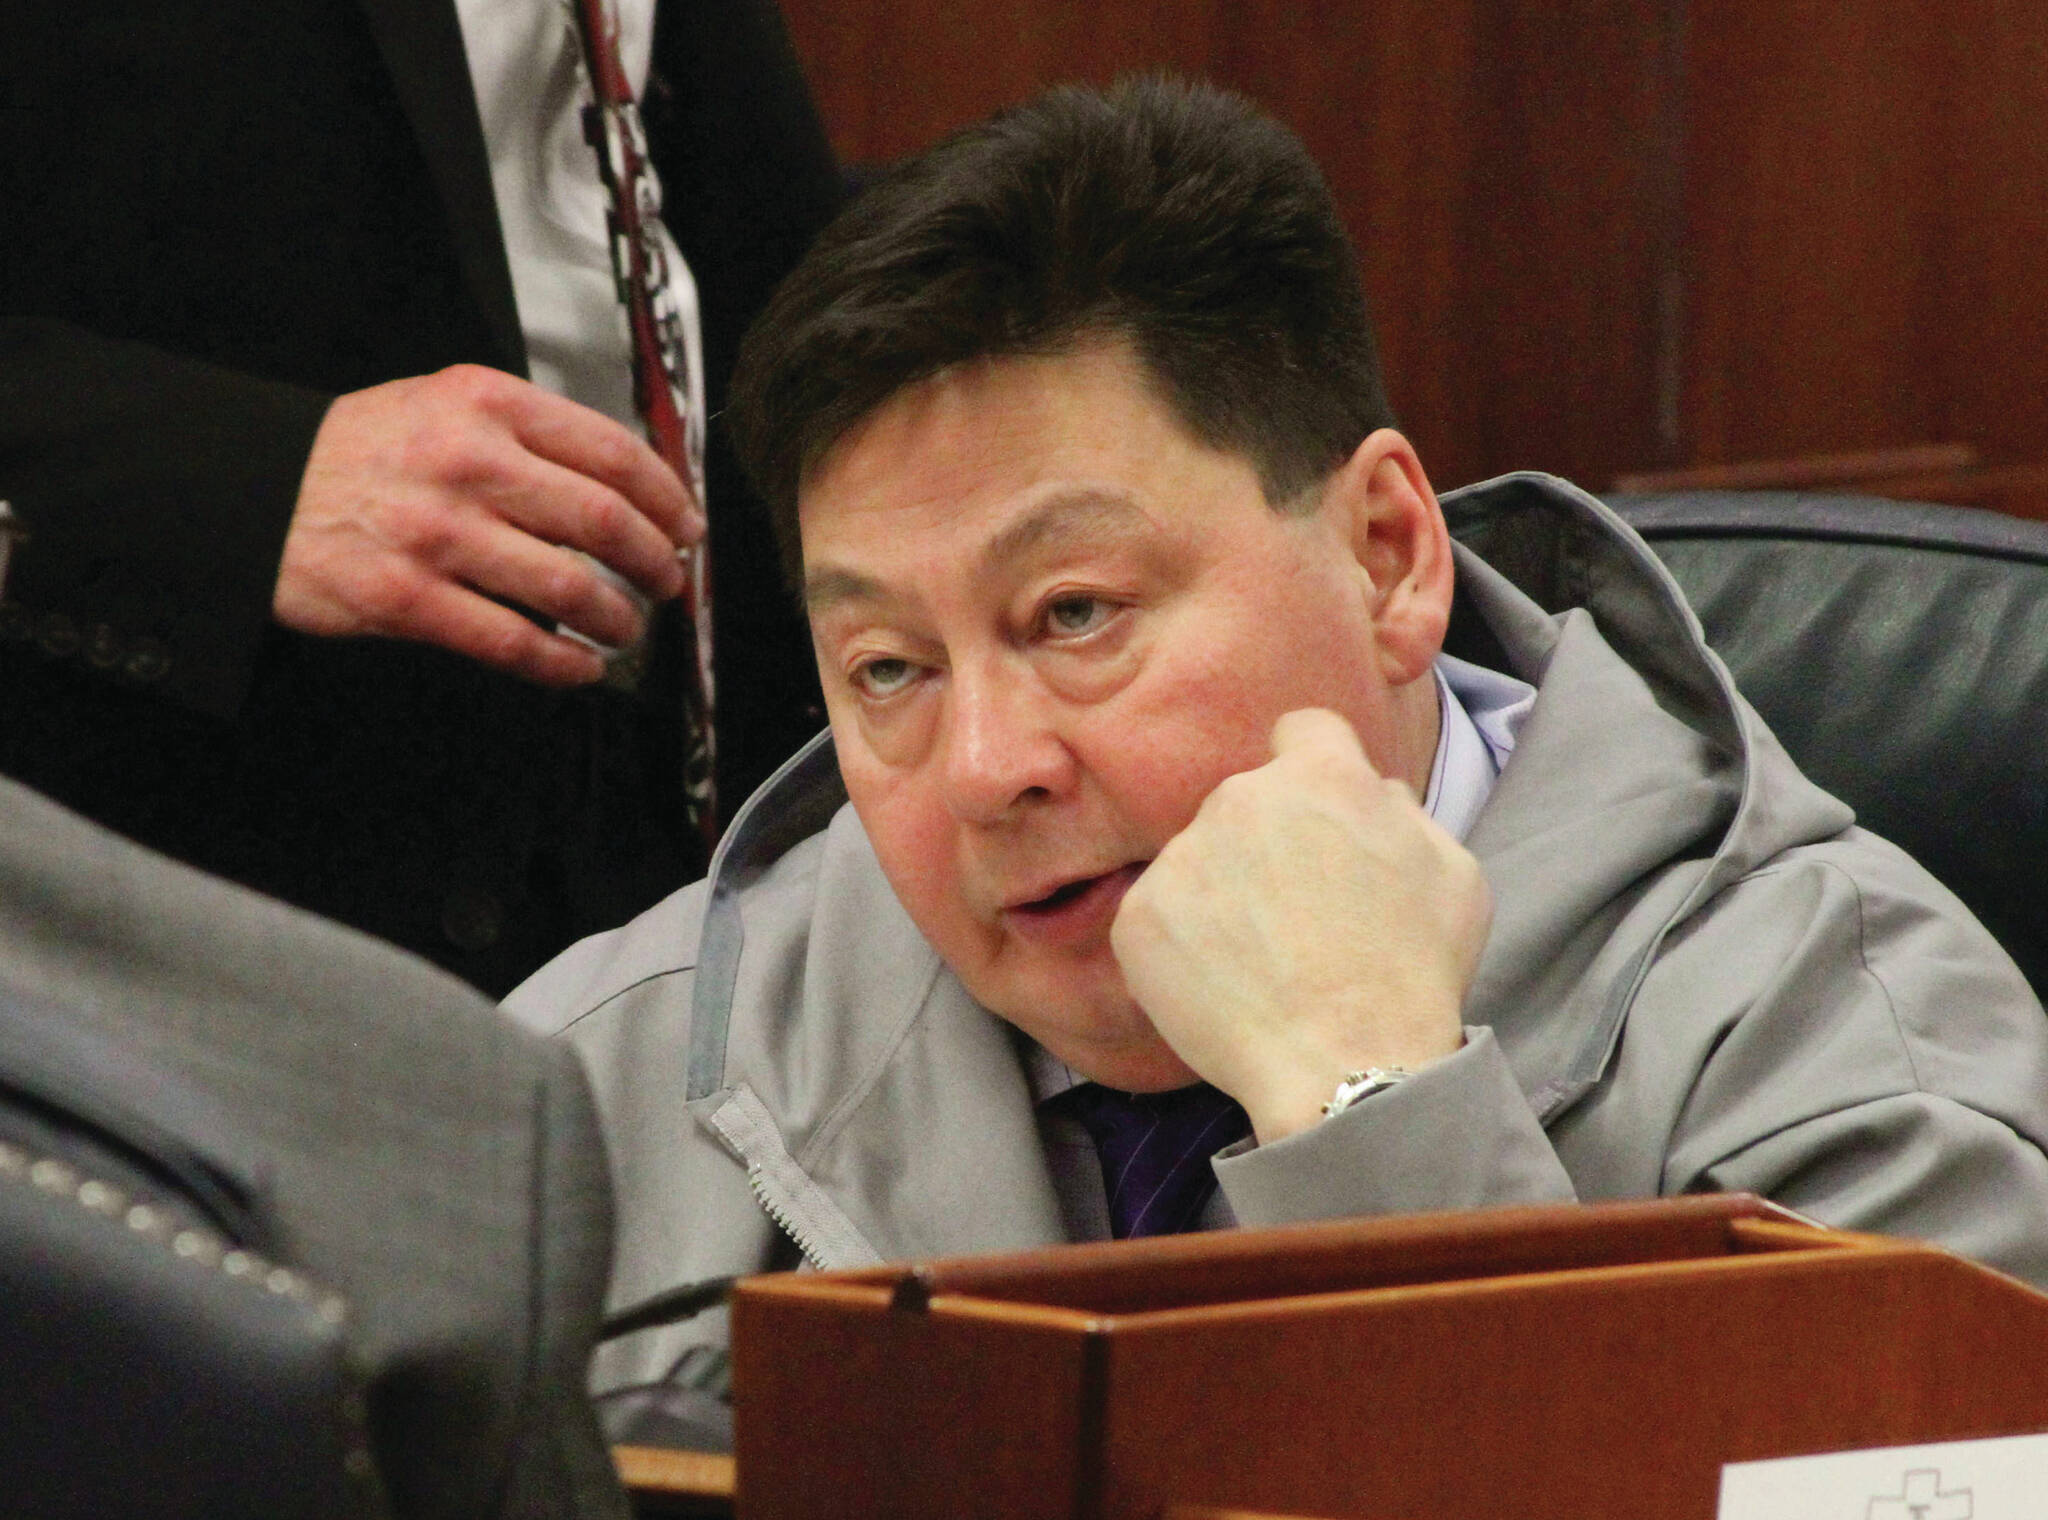 FILE - In this Jan. 17, 2017, file photo, state Rep. Dean Westlake, D-Kotzebue, talks with another legislator during a break in the opening session of the Alaska Legislature in Juneau, Alaska. The son of the former Alaska lawmaker faces charges of manslaughter and evidence tampering in death of his father, Rep. Dean Westlake, according to charging documents. Tallon Westlake was arrested over the weekend. An online court records system did not show an attorney Monday, Aug. 22, 2022 who could speak on his behalf. The charging documents are dated Sunday. (AP Photo/Mark Thiessen, File)